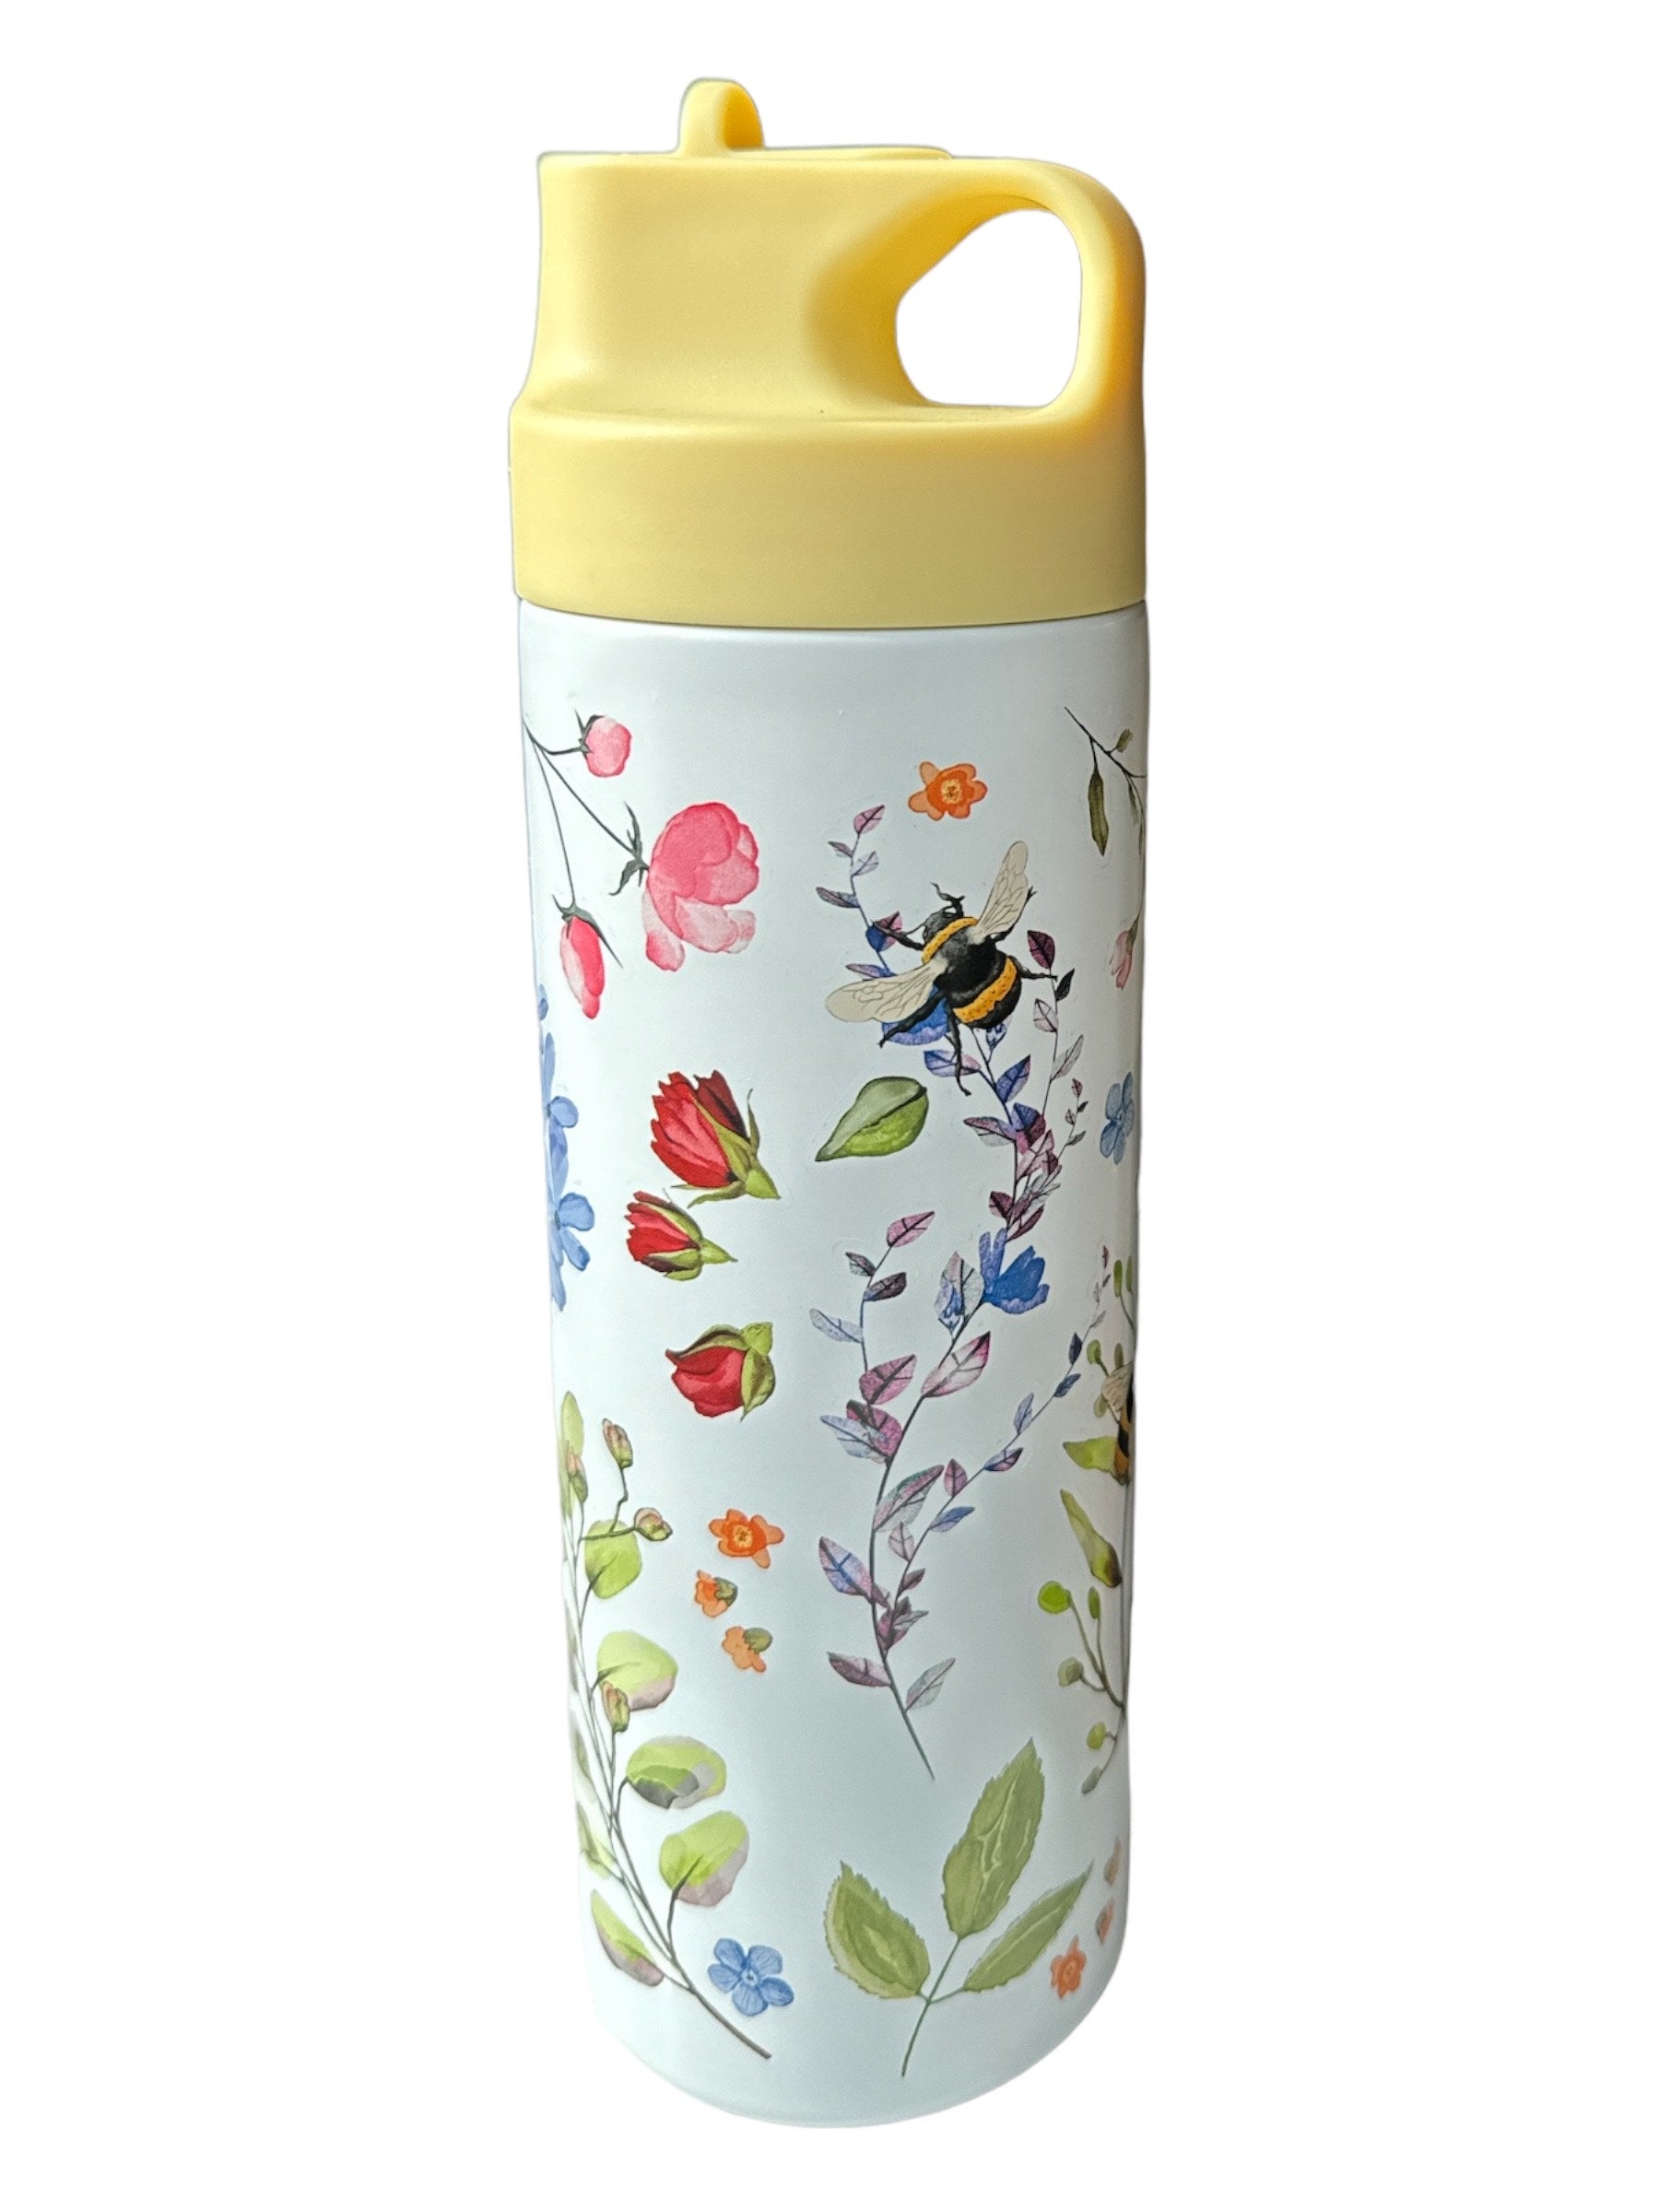 Nectar Meadows Insulated Water Bottle with Straw